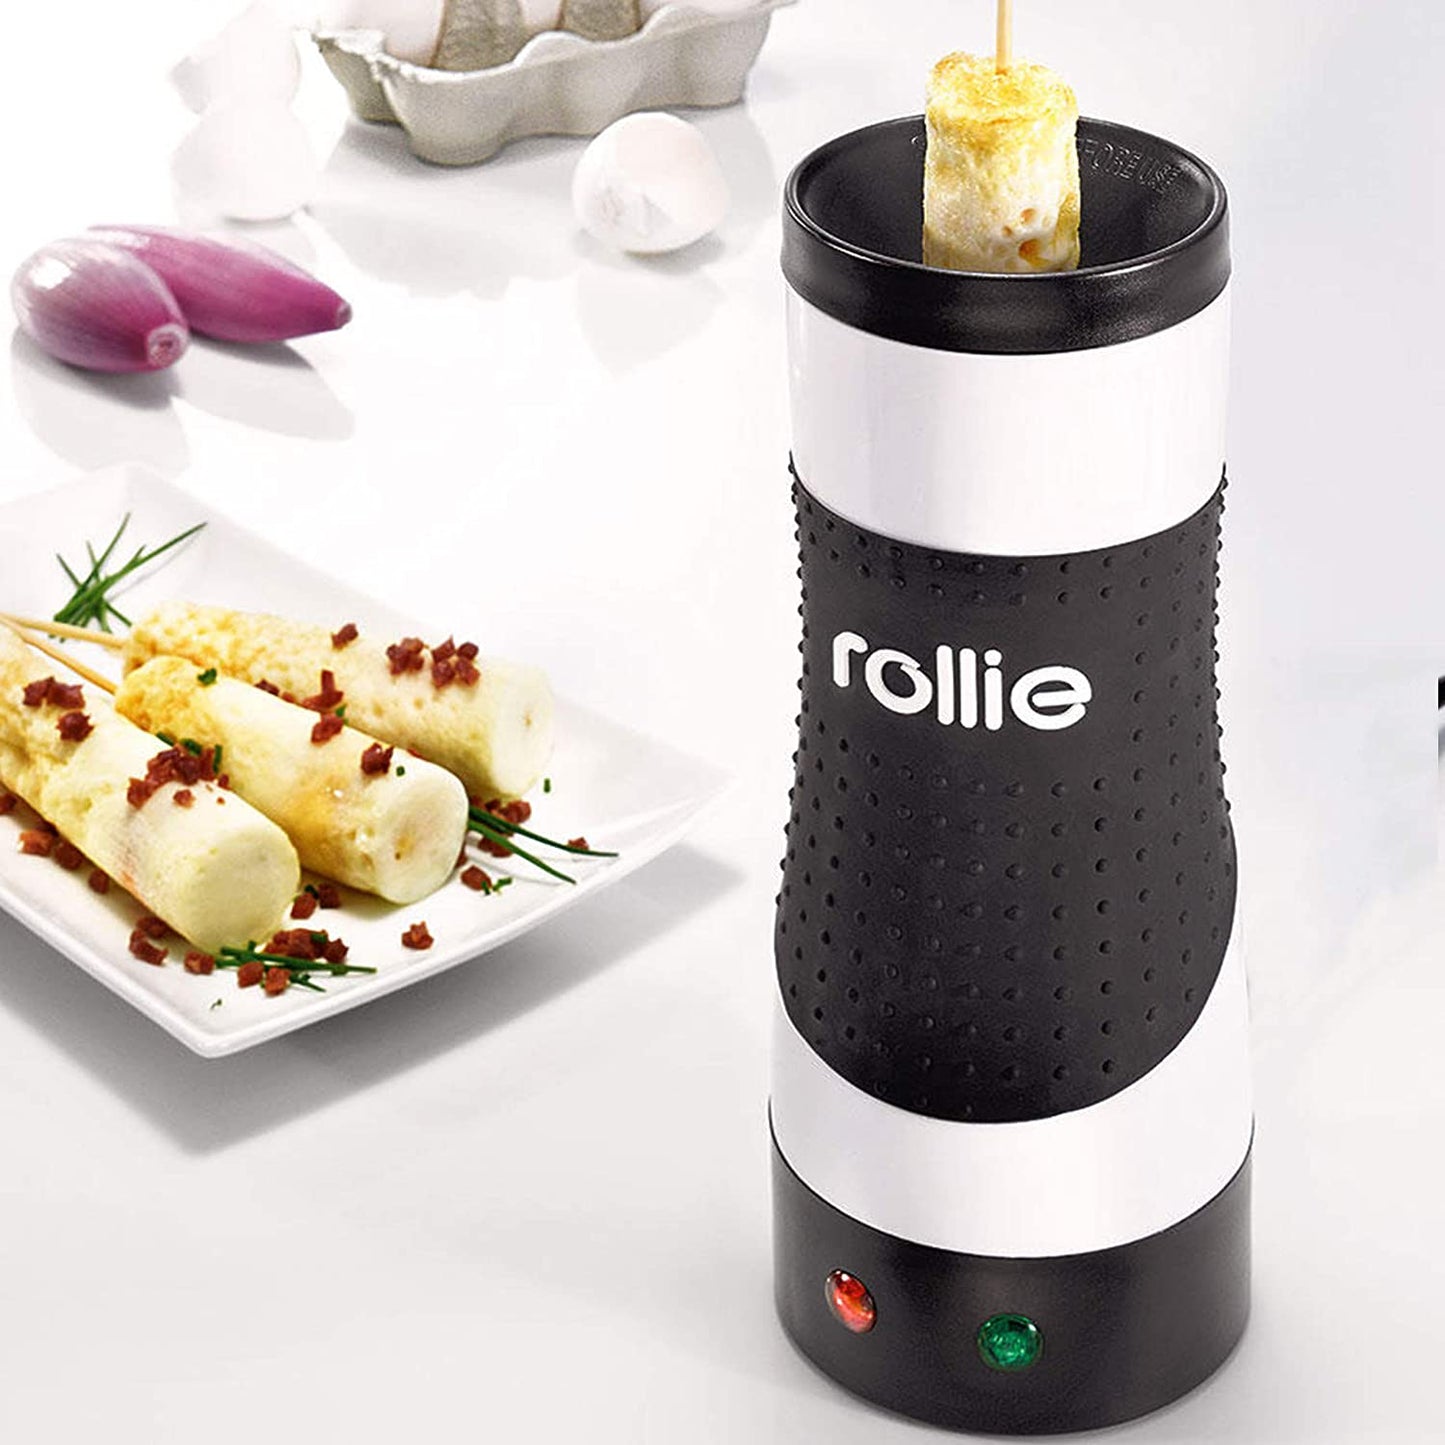 Rollie Electric Roll egg machine hookupcart